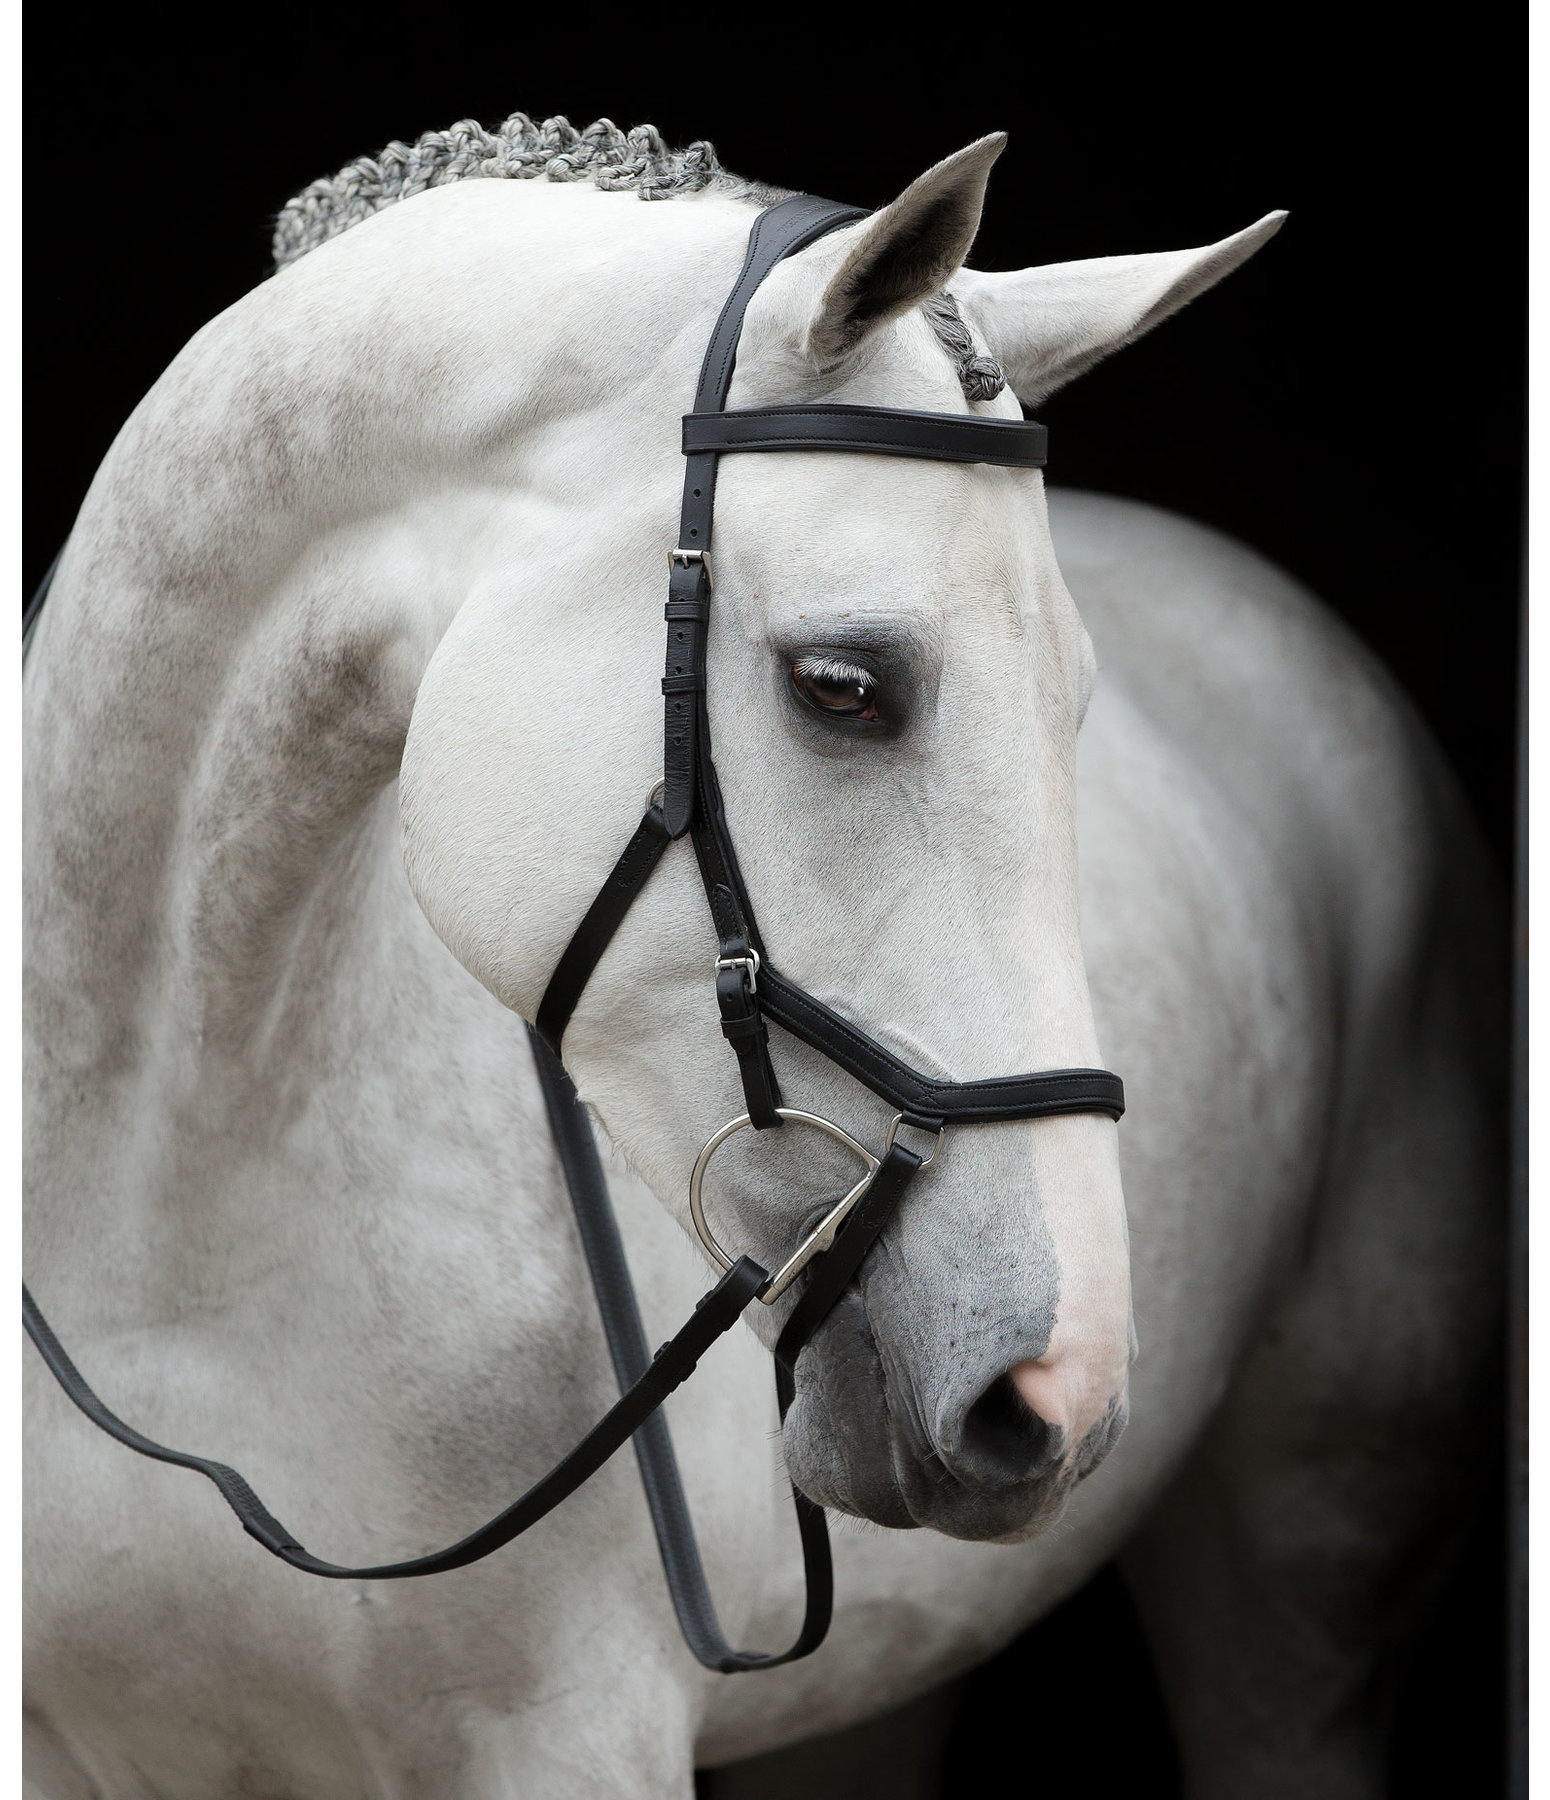 RAMBO MICKLEM Competition Bridle